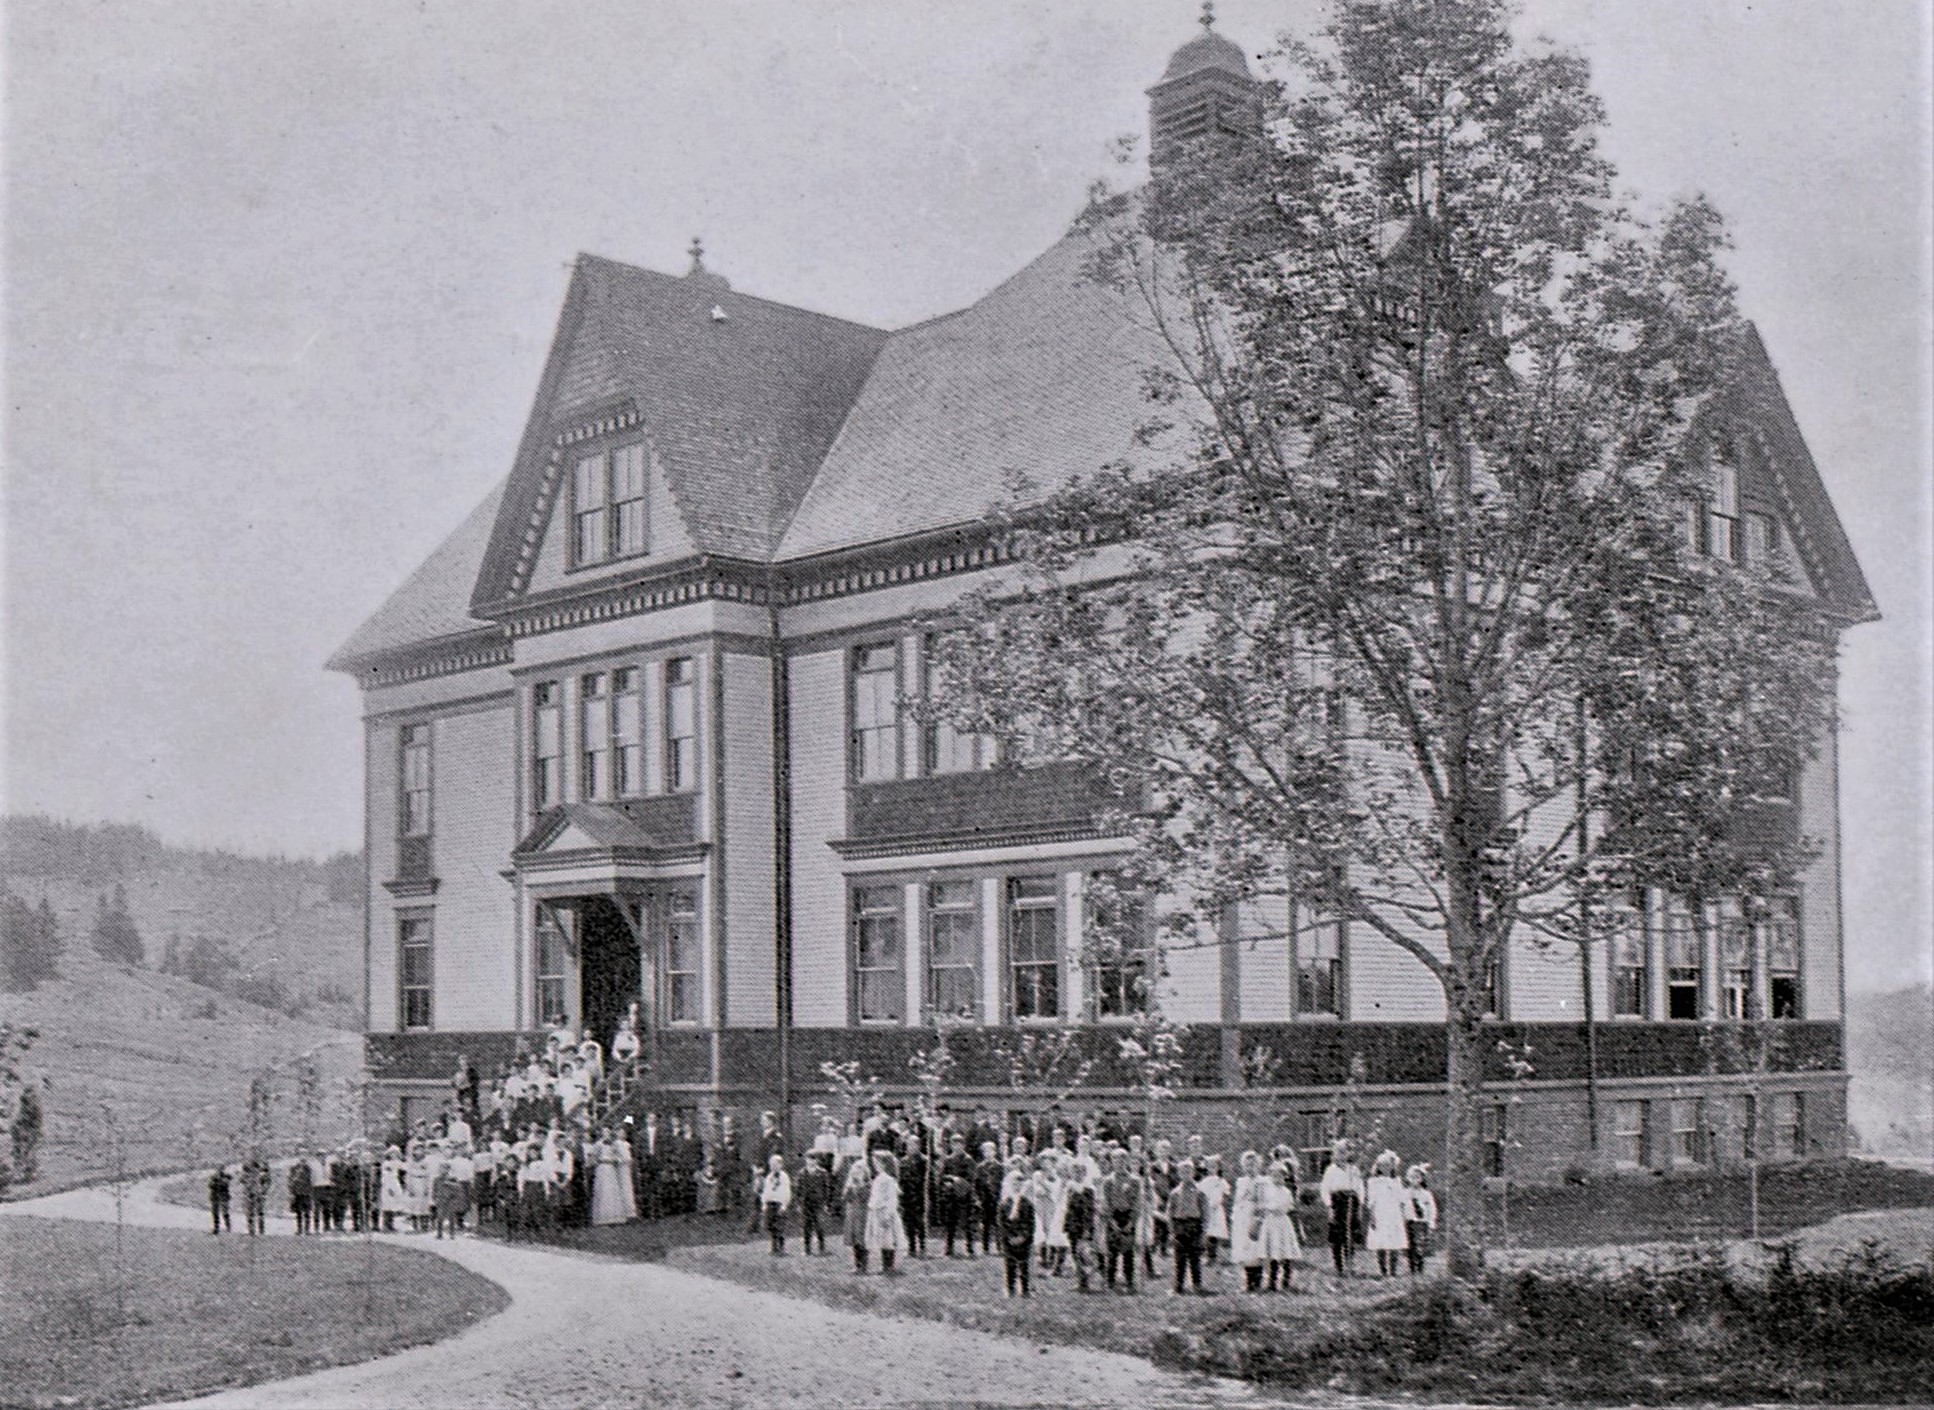 The school with students and staff standing on the front steps and lawn.